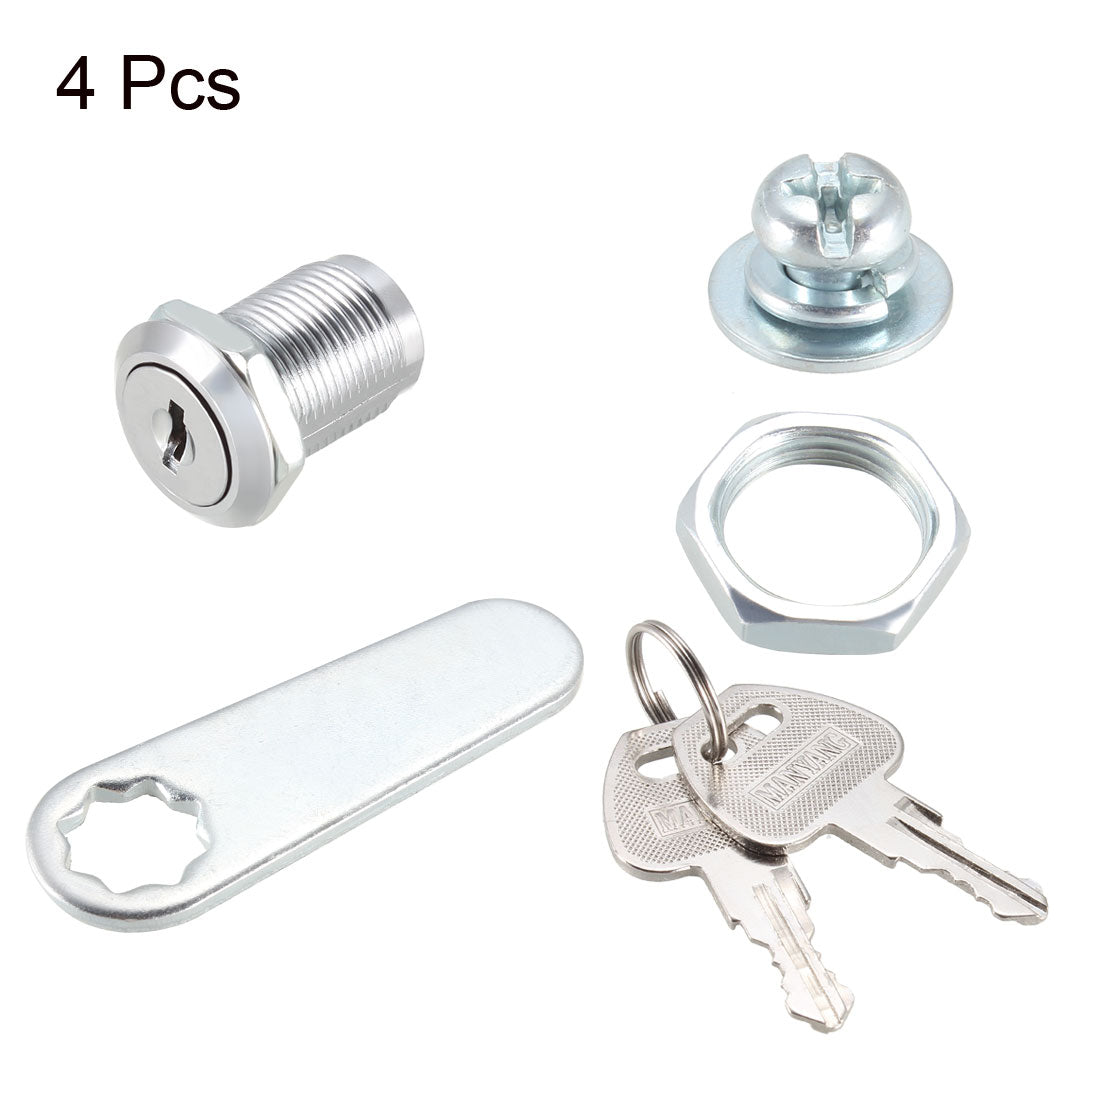 uxcell Uxcell Cam Locks 25mm Cylinder Length Fits Max 5/8-inch Panel Keyed Different 4Pcs